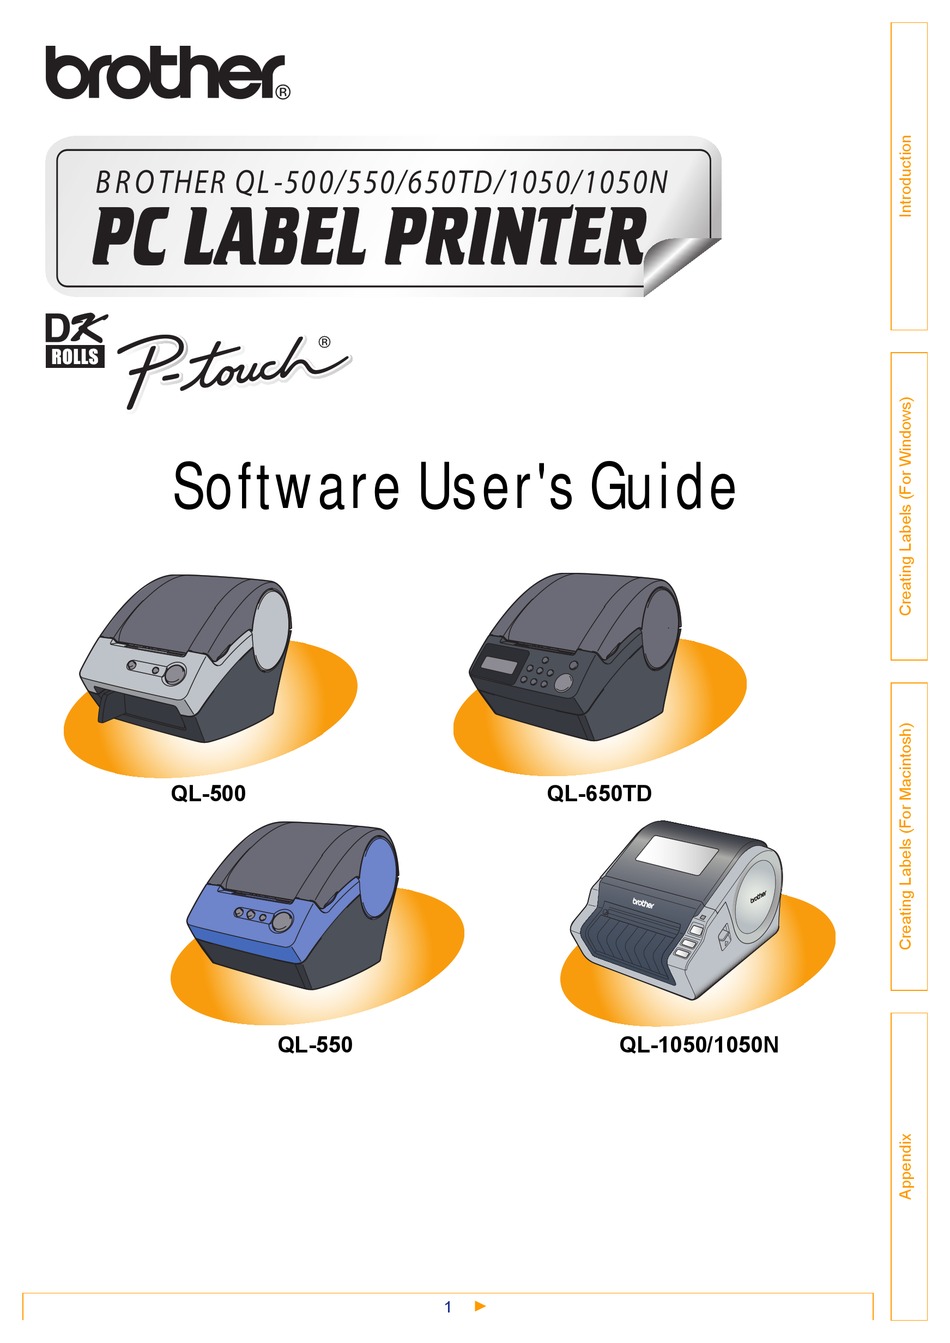 brother p-touch ql-1050 software download